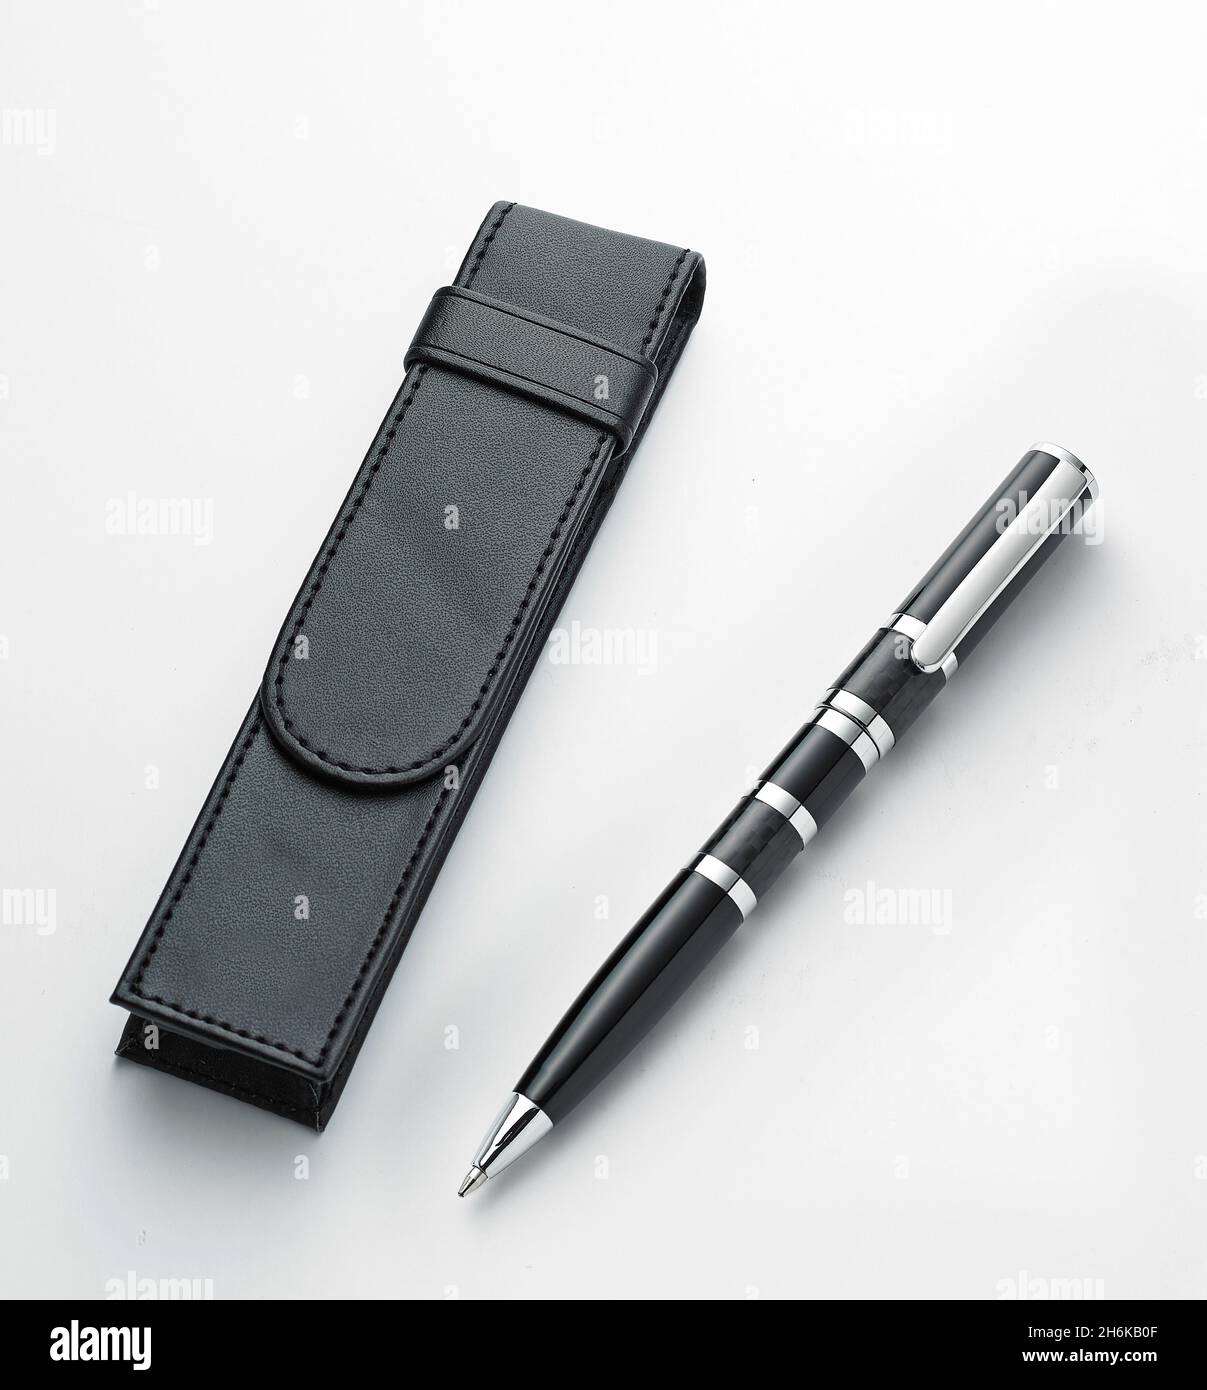 Silver and black ball point pen with case Stock Photo